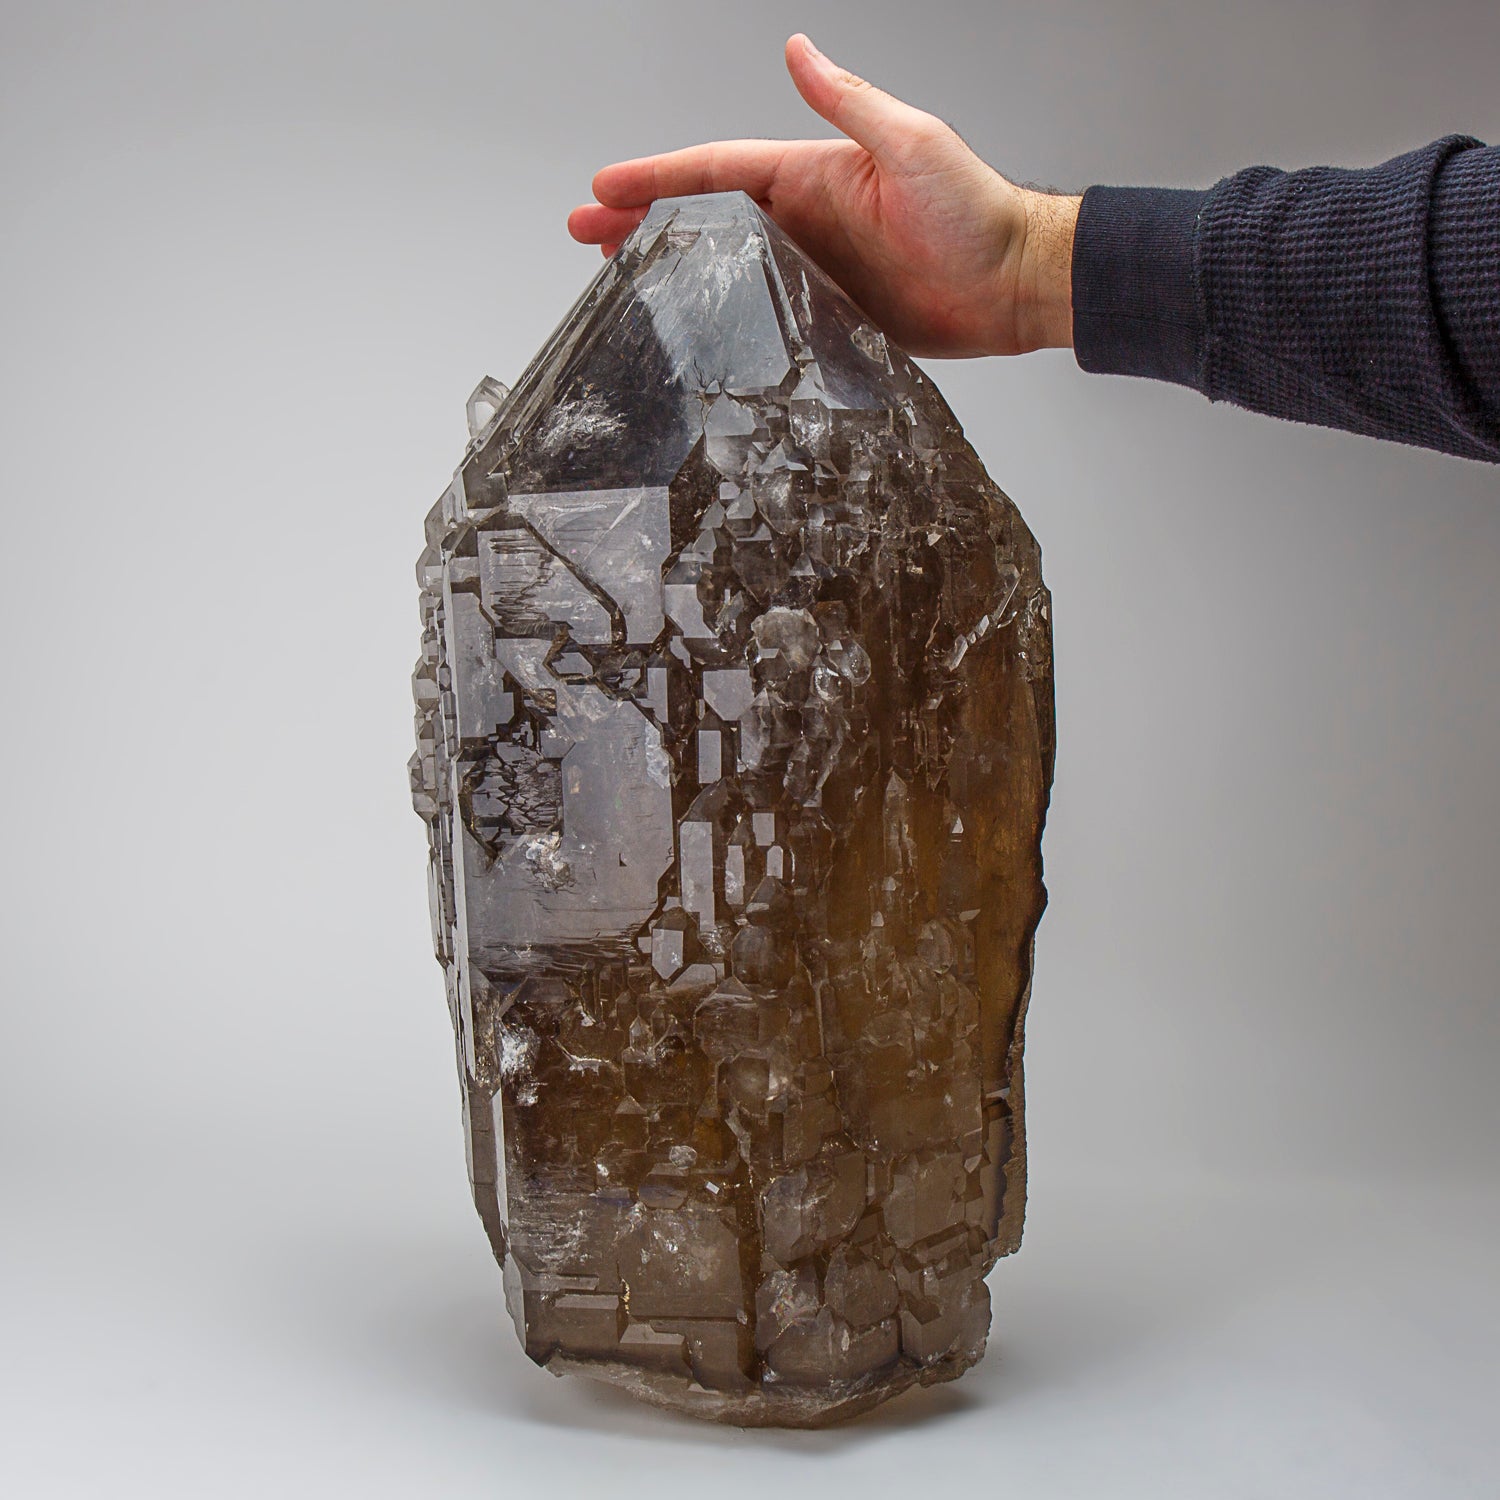 Huge Genuine Cathedral Smoky Quartz Crystal Point from Brazil (81 lbs)